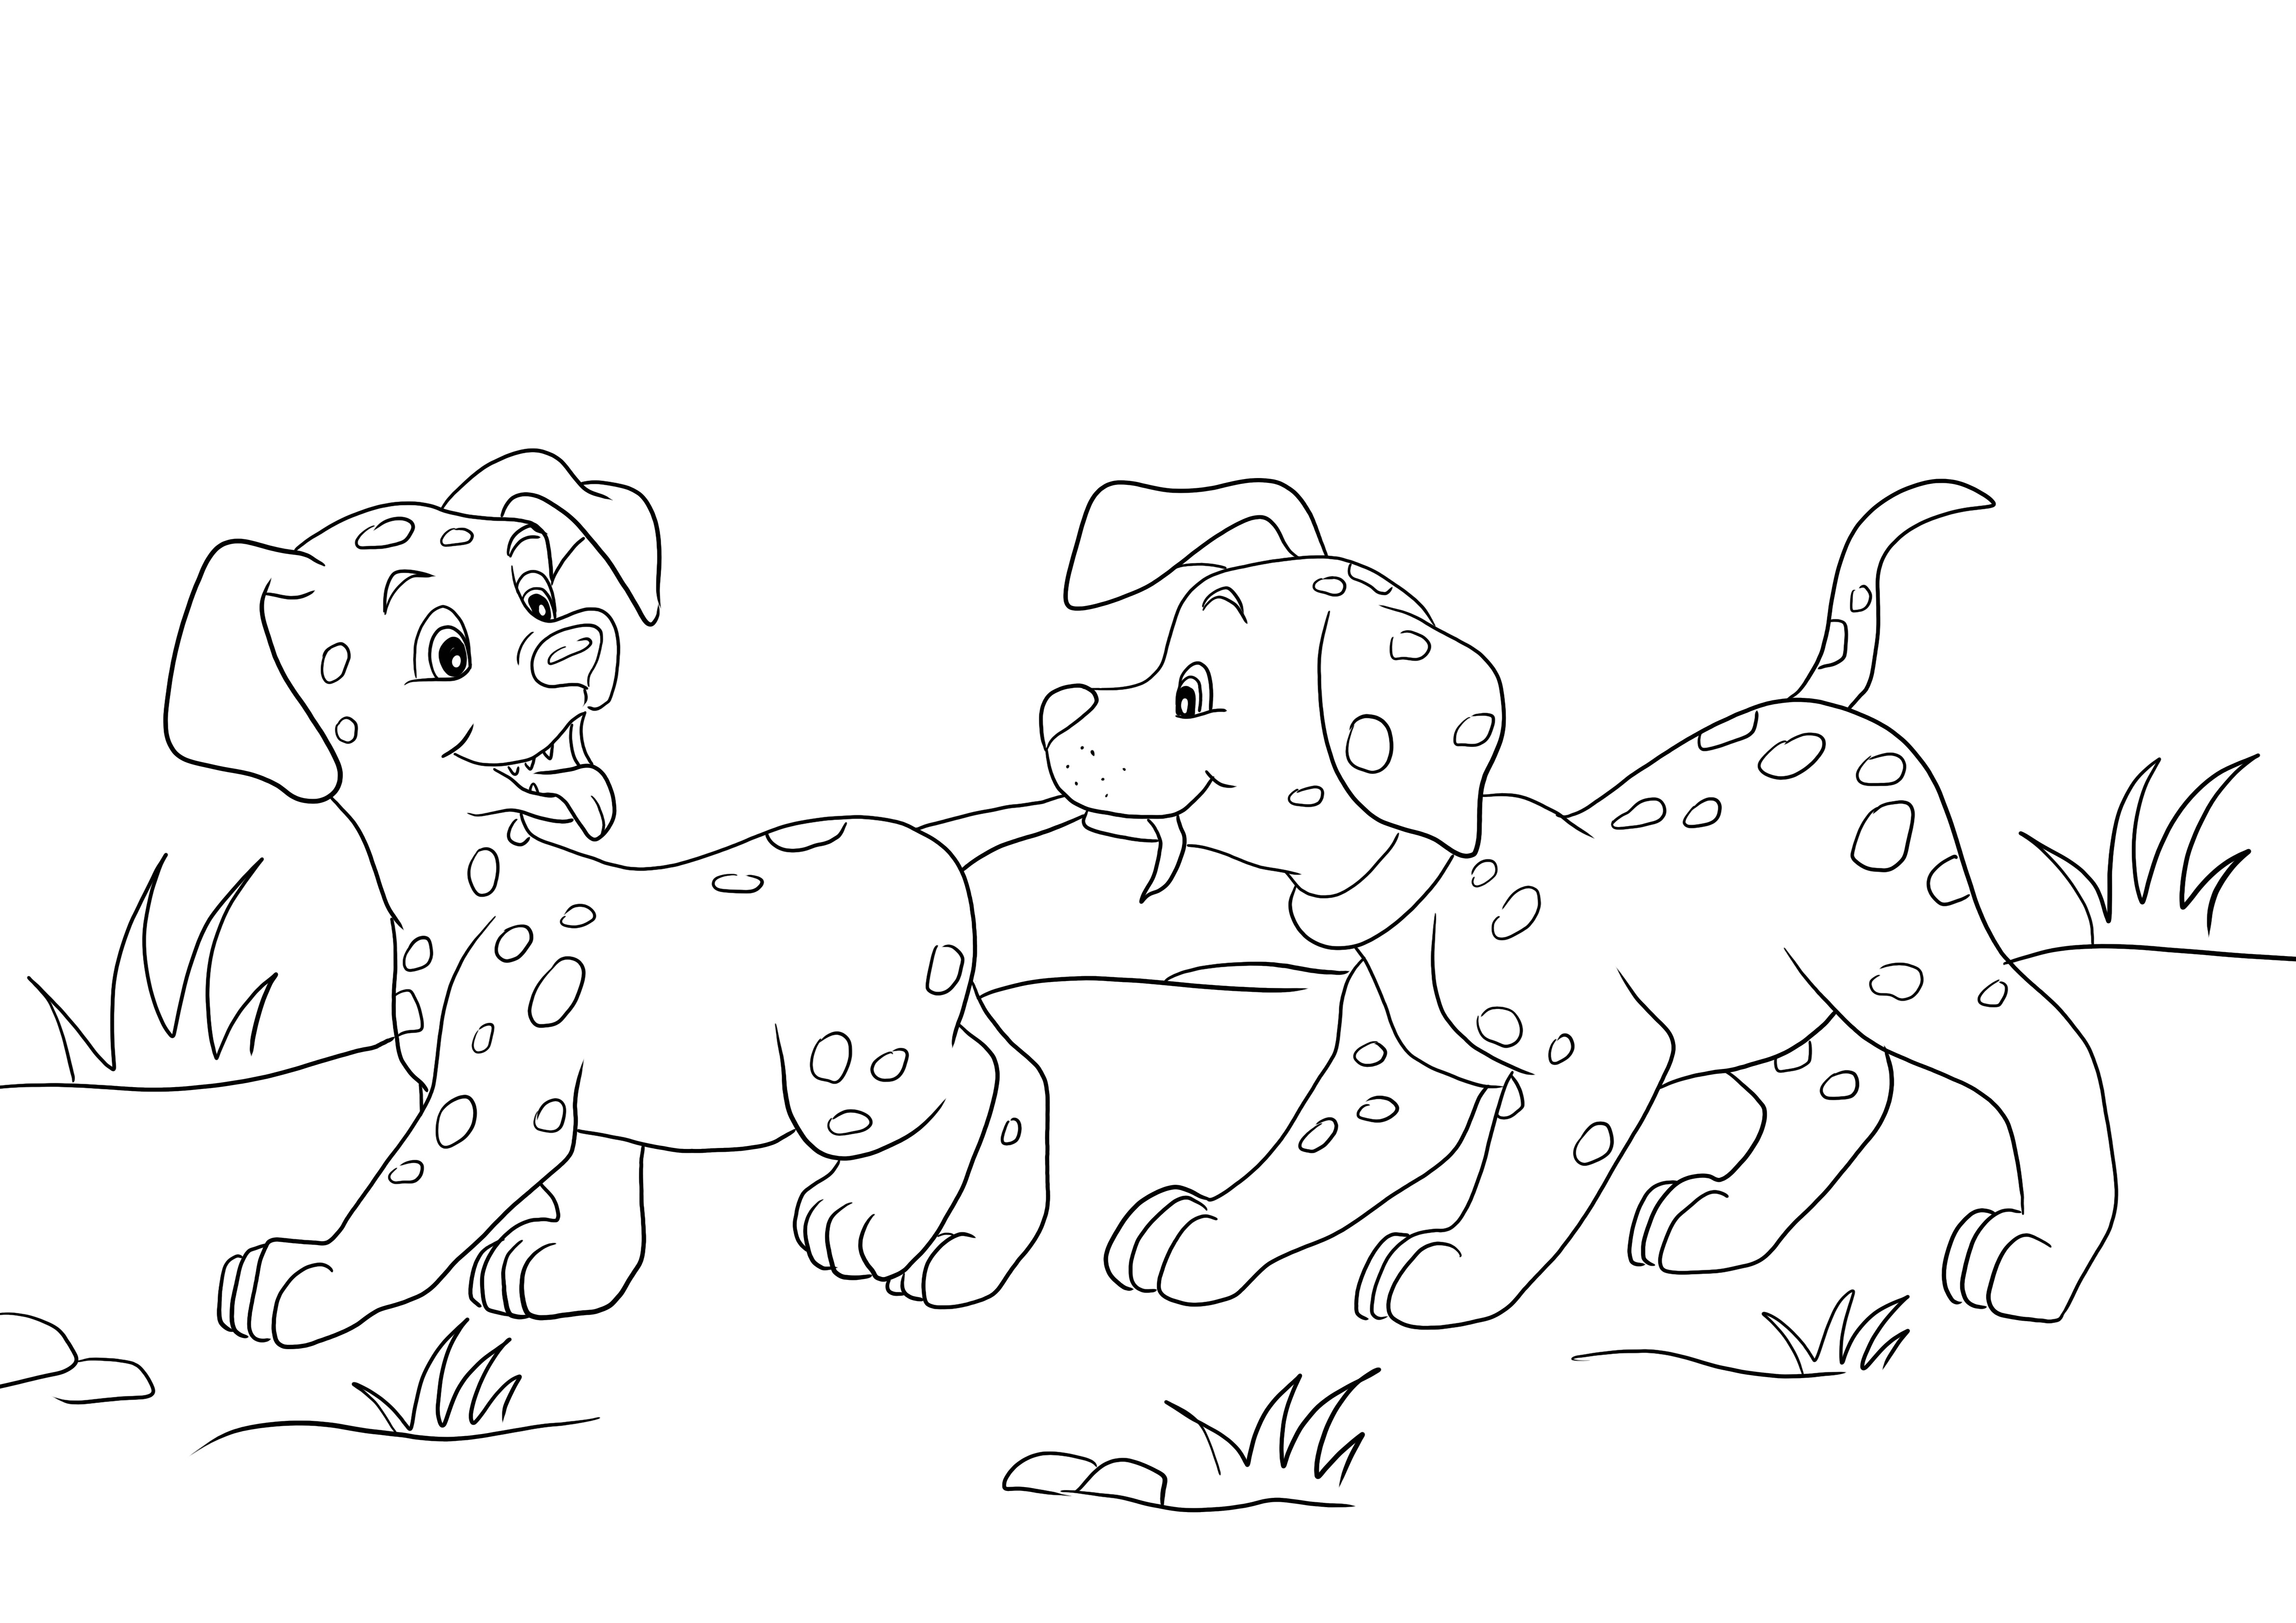 Penny and Whizzer Dalmatian for coloring and free printing for kids